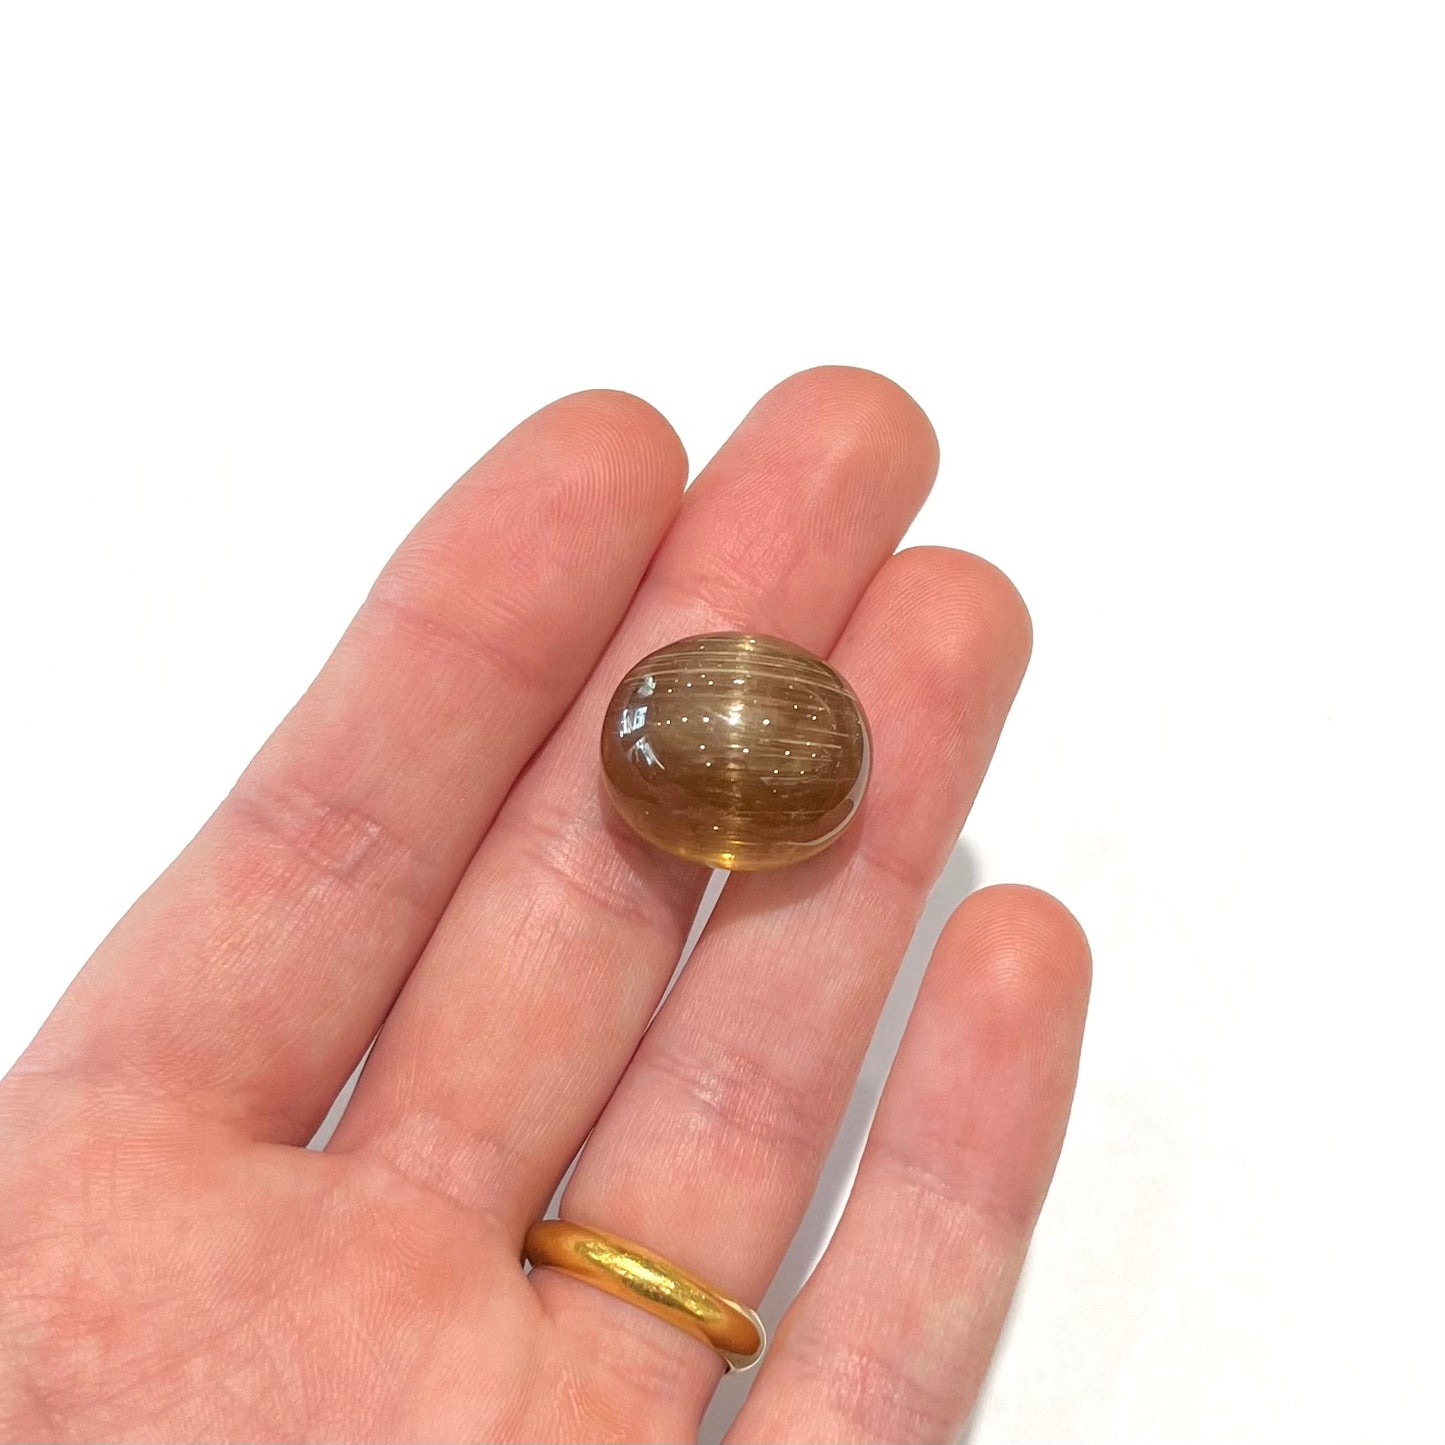 A loose, golden brown cat's eye dravite tourmaline gemstone.  The stone is cut into an oval shaped cabochon.